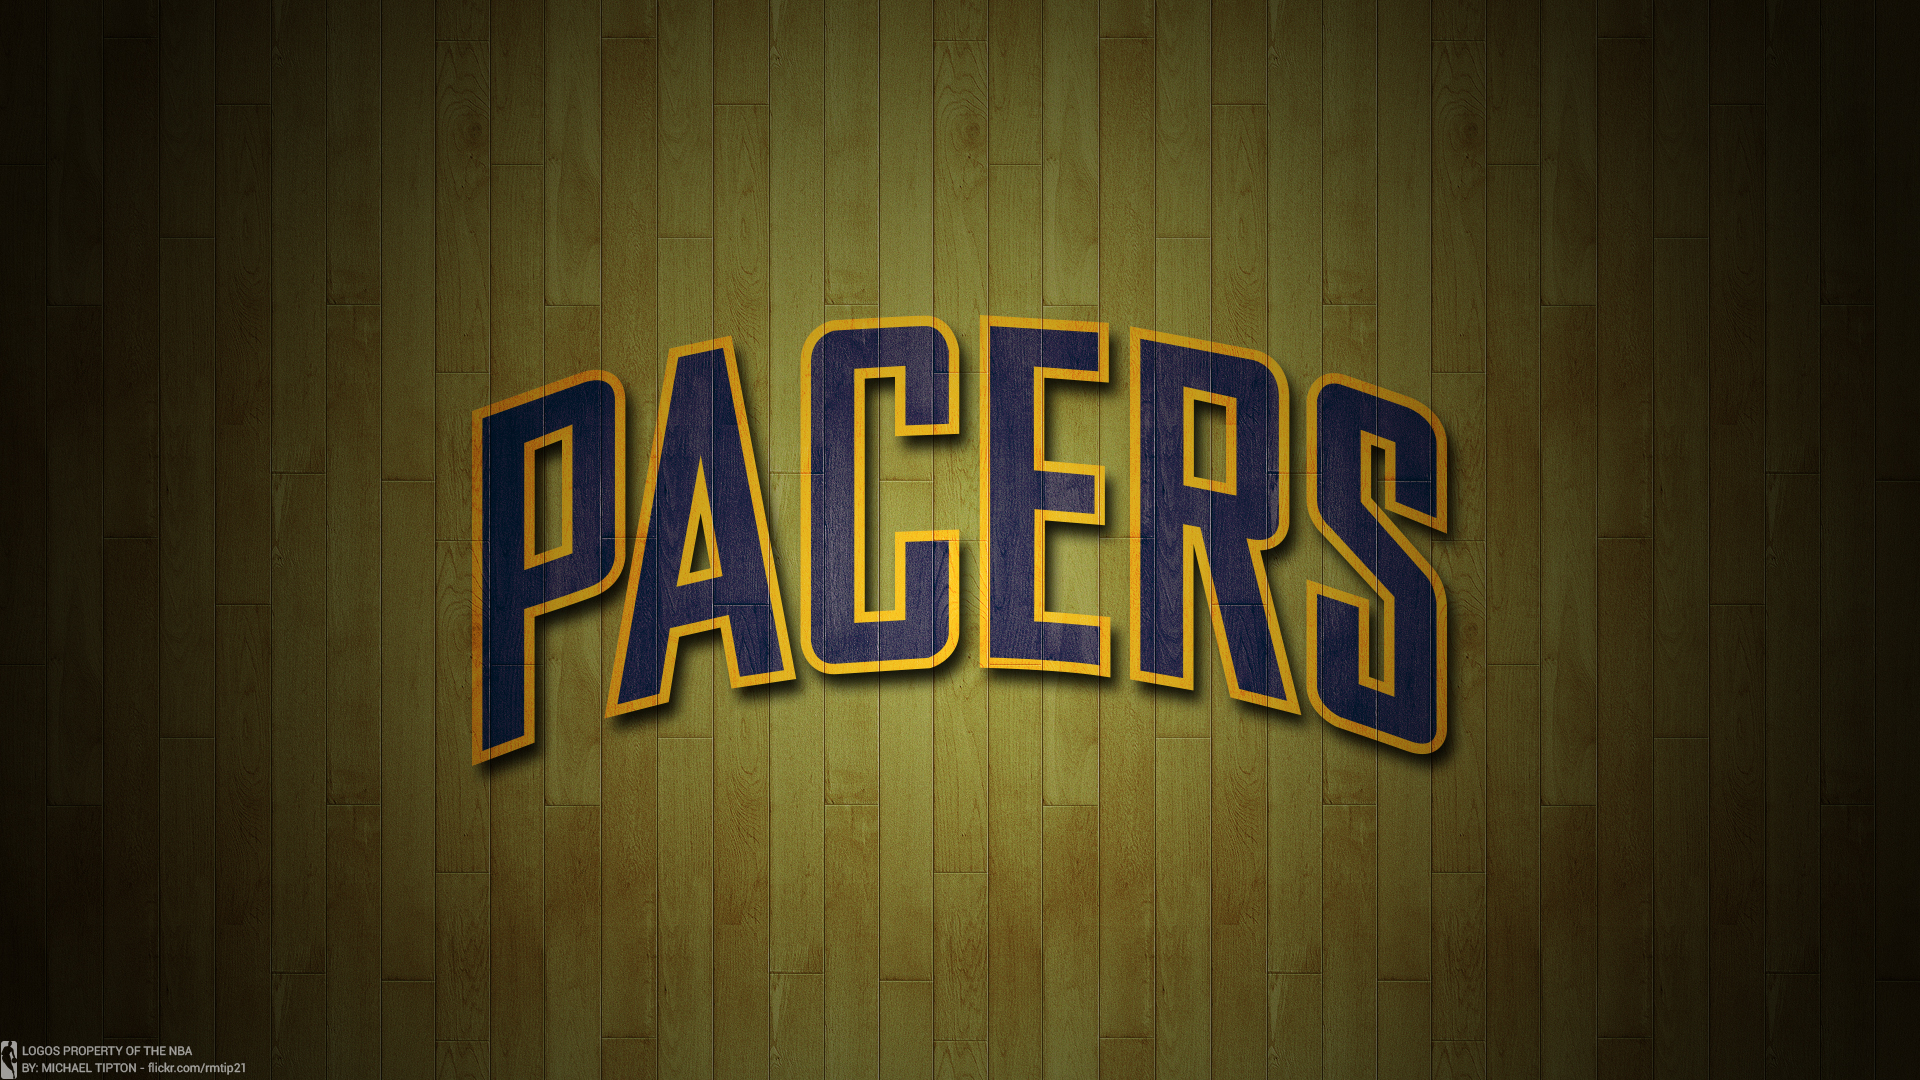 Pacers wallpaper | 1920x1080 | #80083